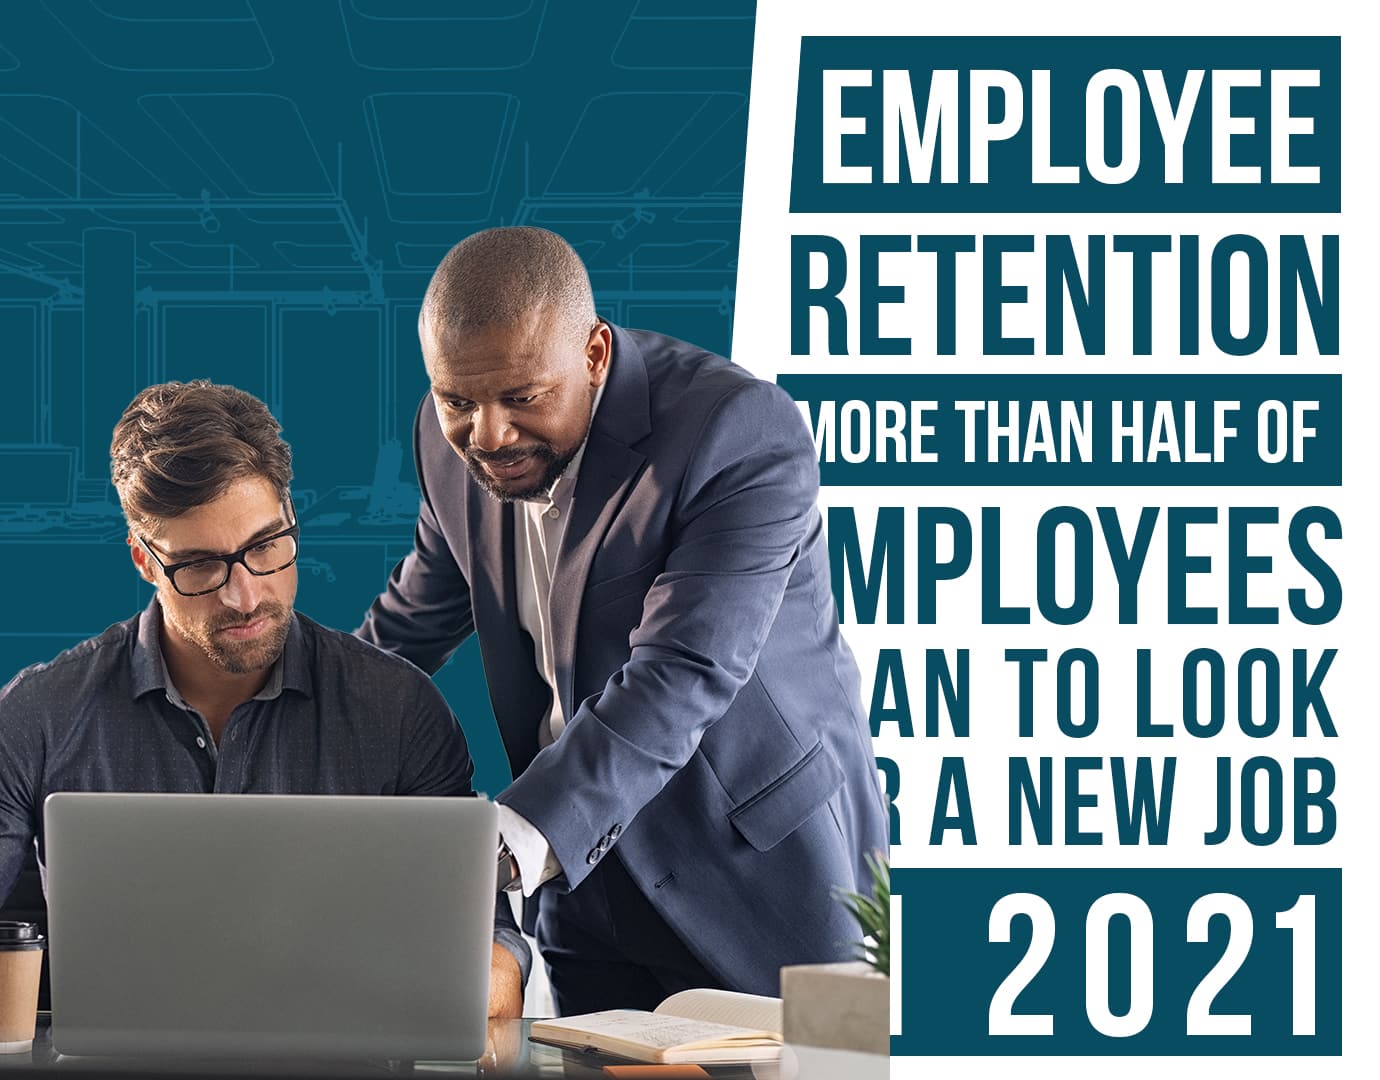 Employee Retention More than Half of Employees Plan to Look for a New Job in 2021